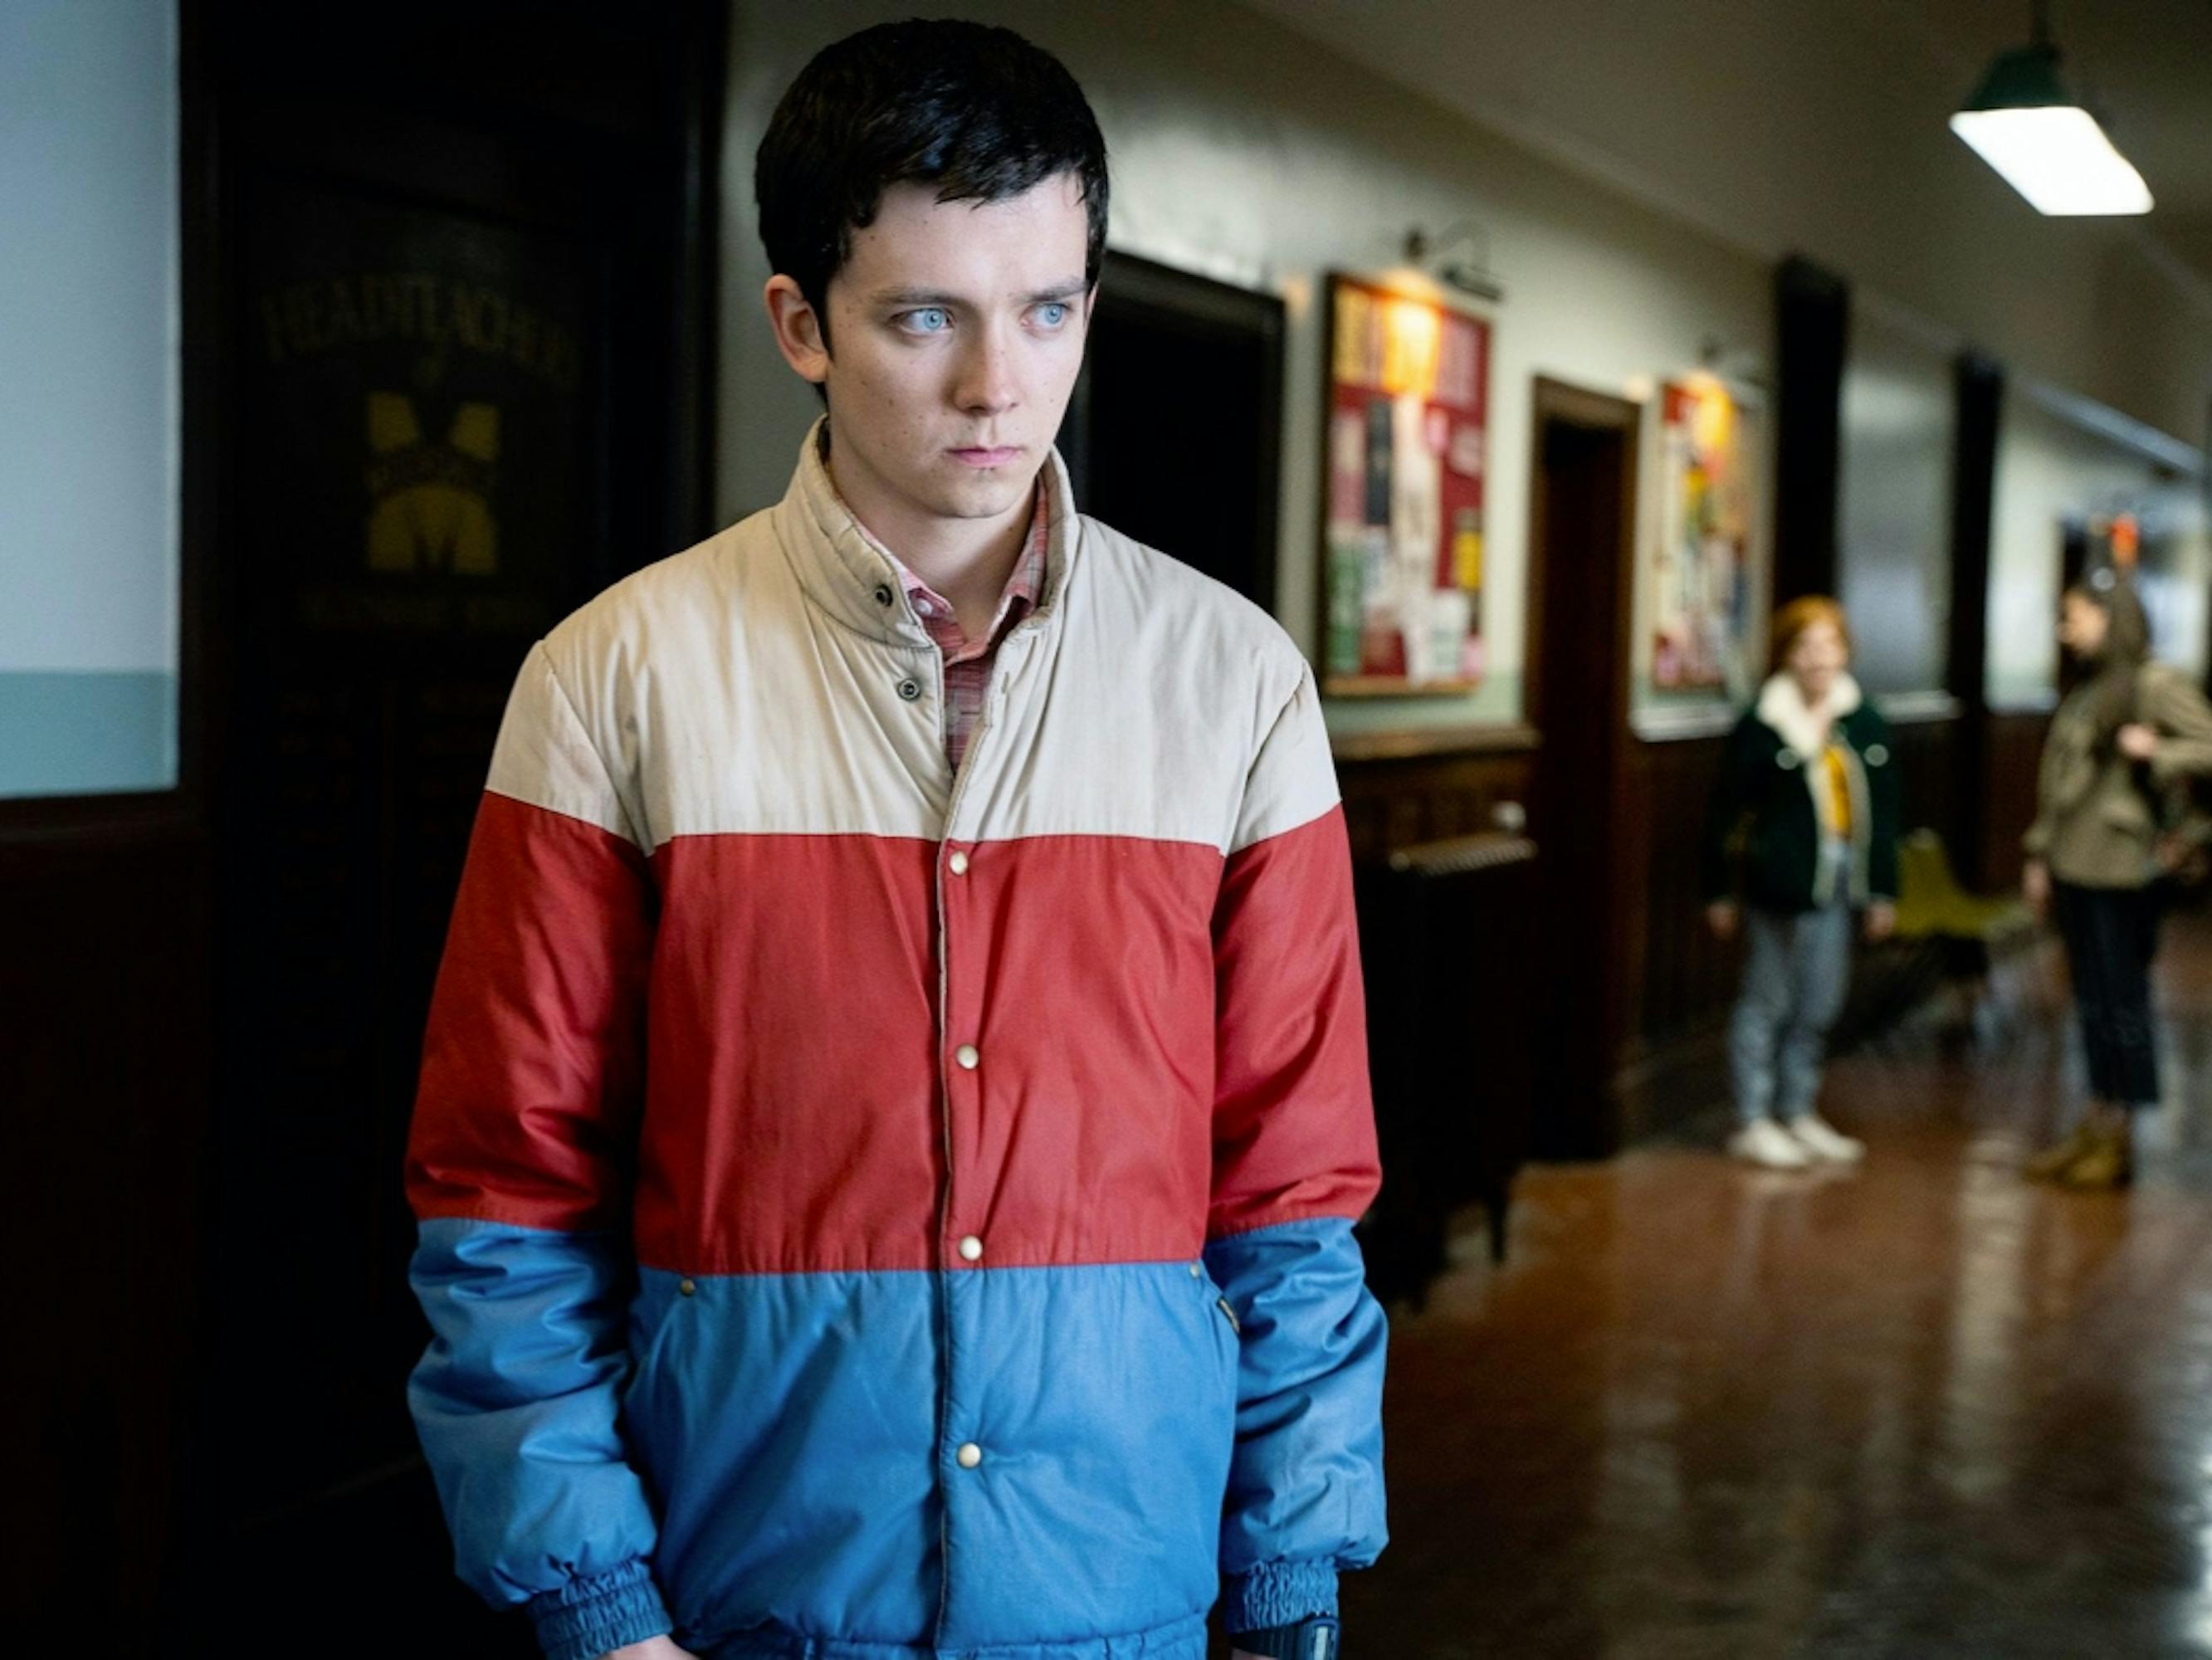 Otis Milburn (Asa Butterfield) wears his tricolored coat as he sulks in the school hallway. The floor is a shiny hardwood, and there are two other students in the distance.